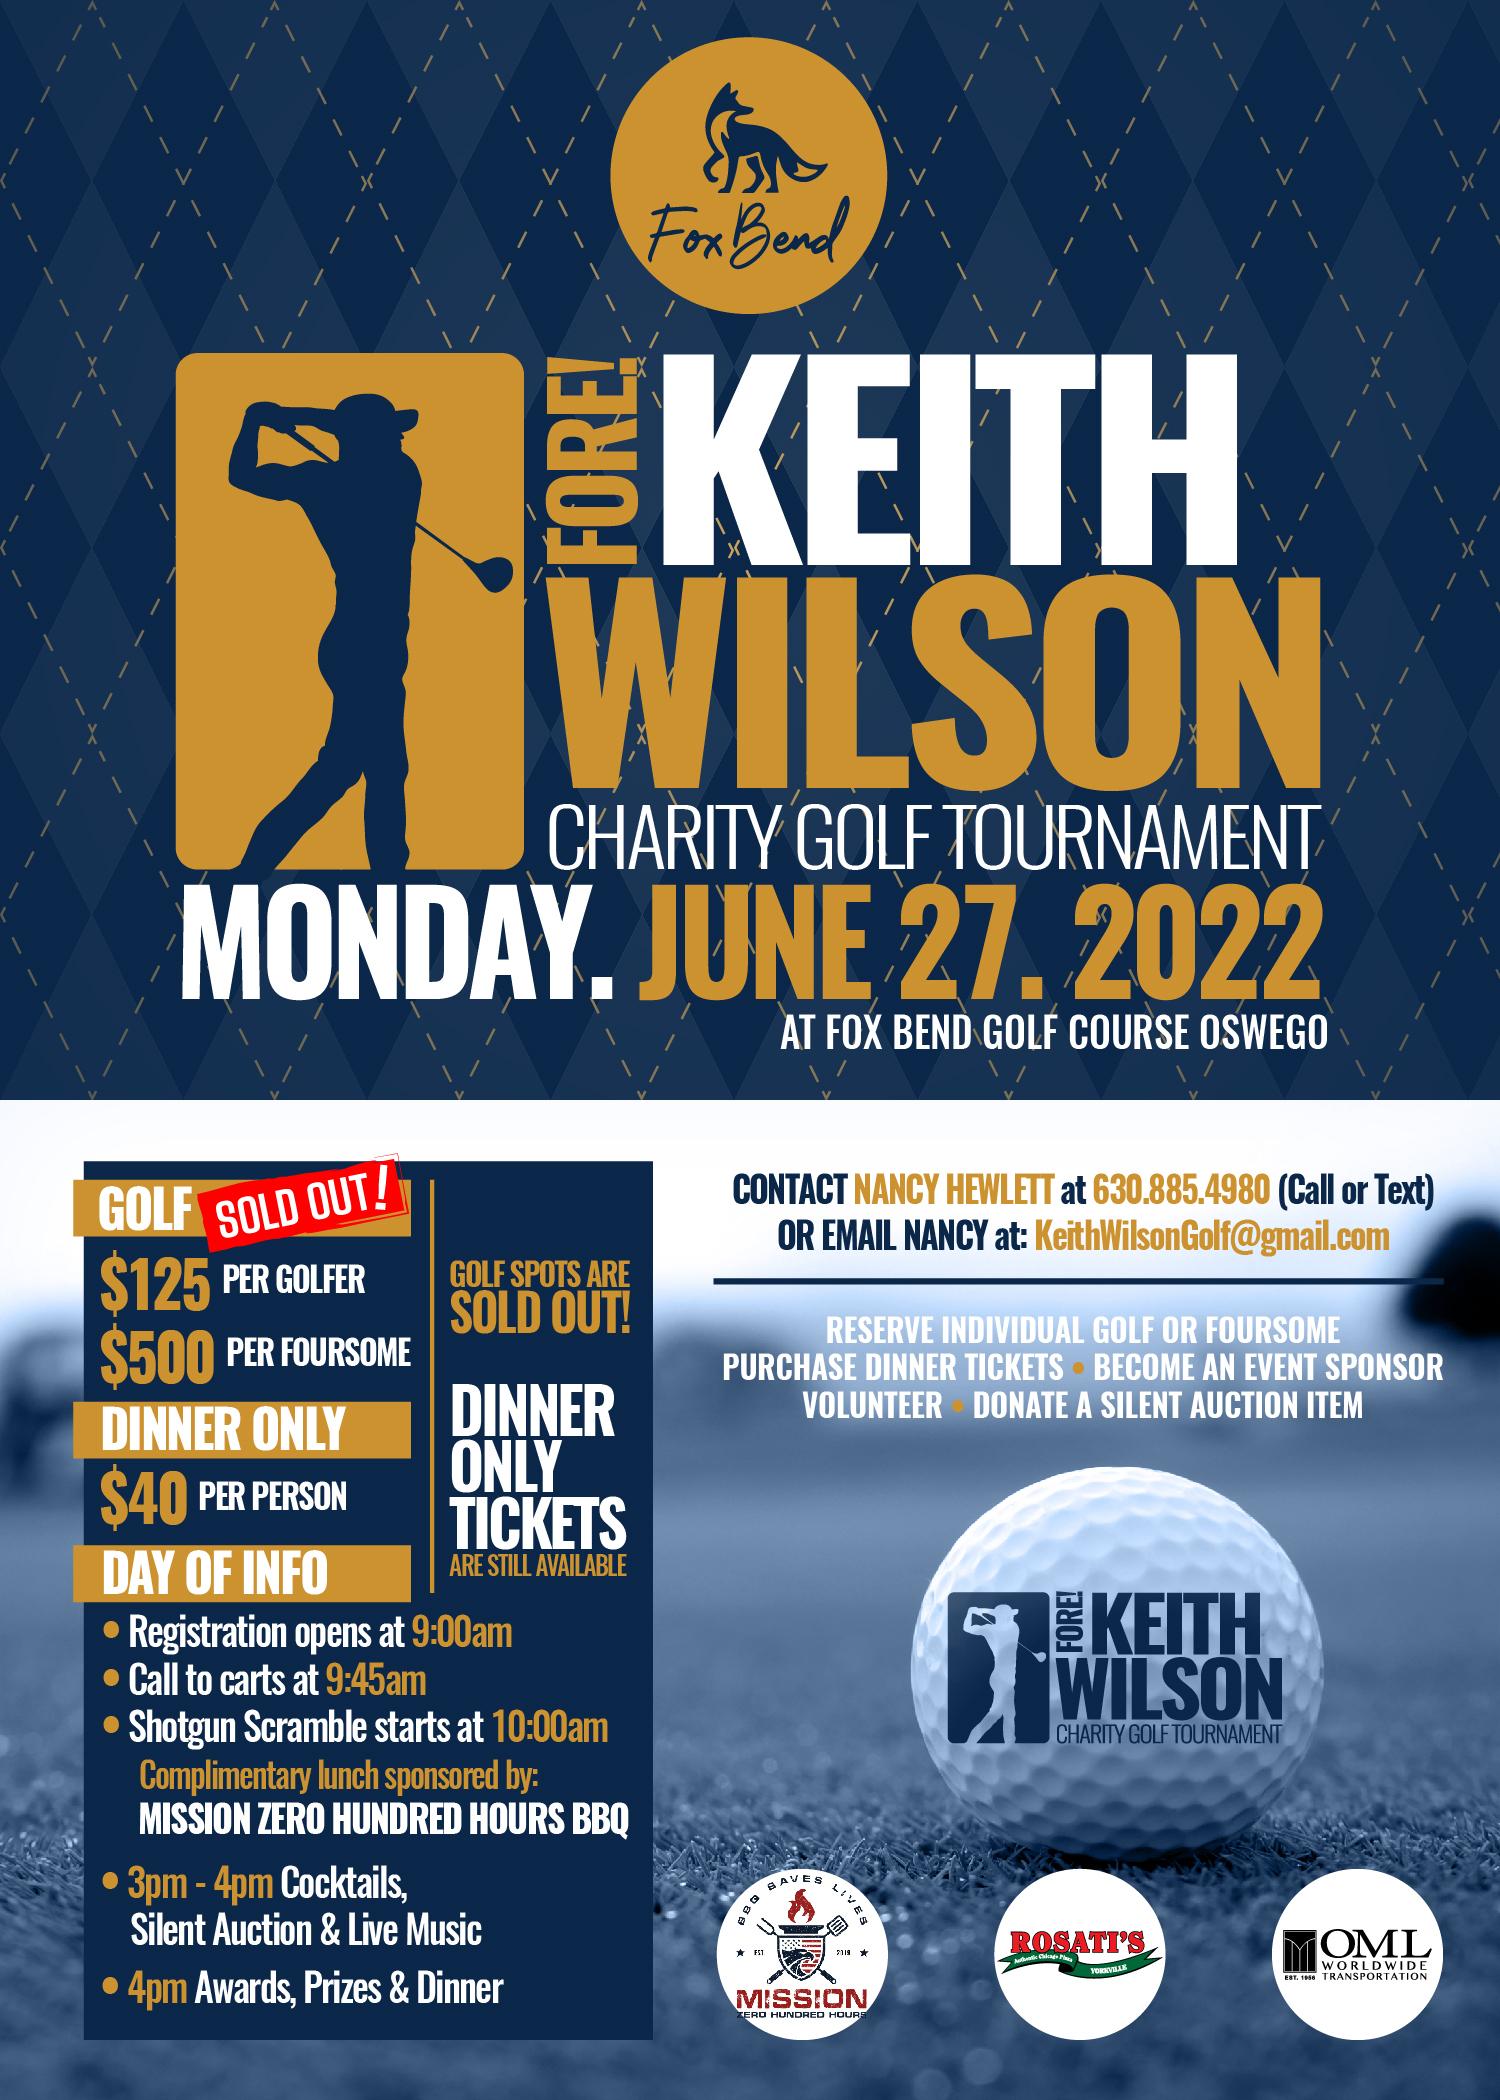 FORE! Keith Wilson Charity DINNER after the Golf Tournament